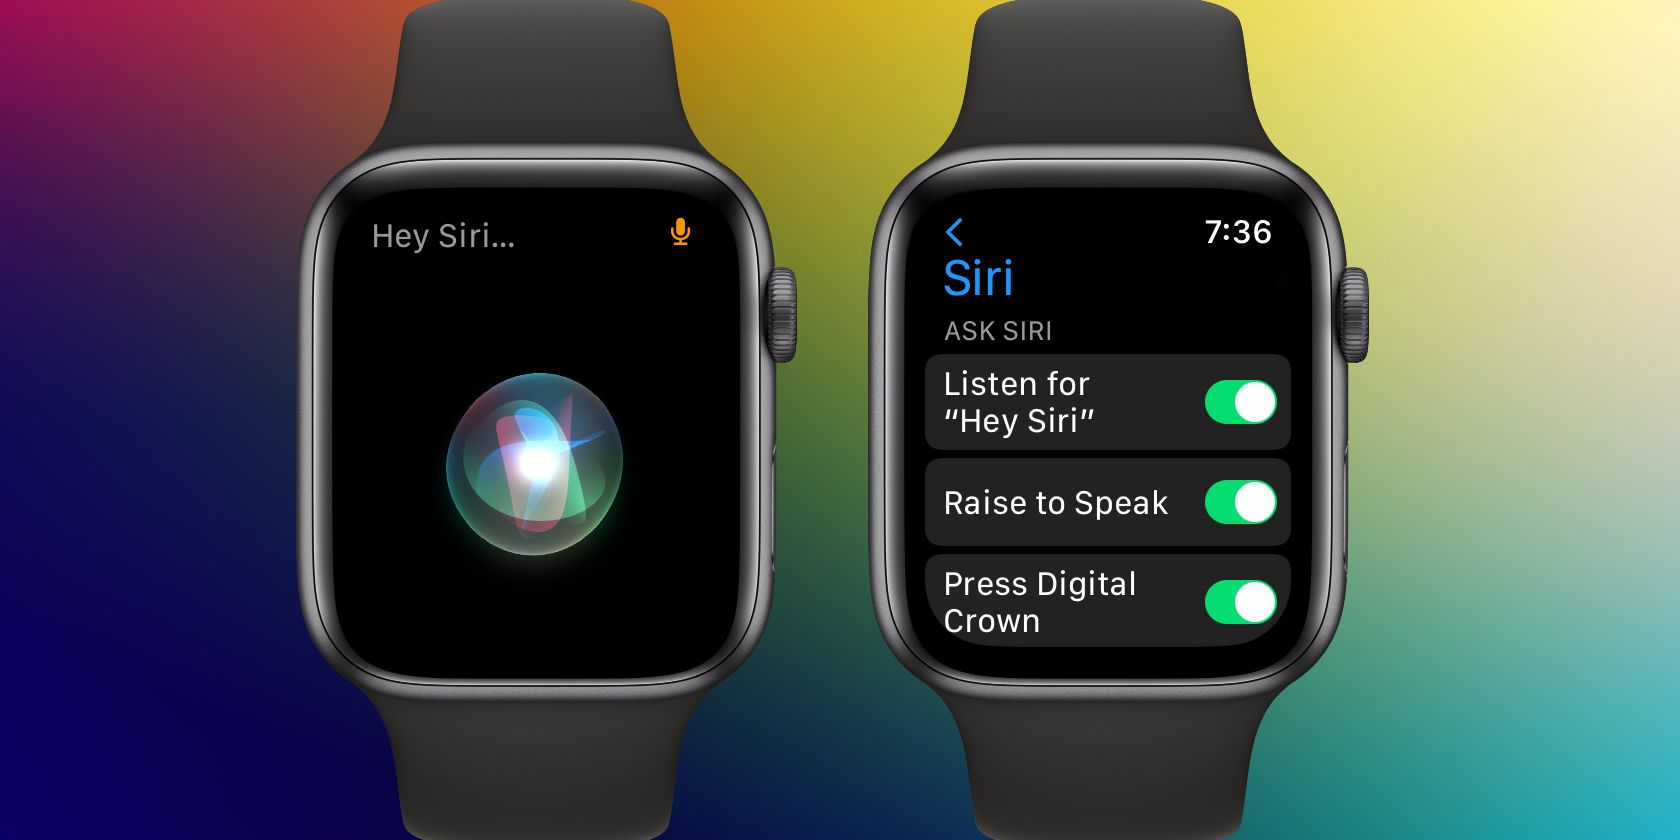 Siri on an Apple Watch over a colored background